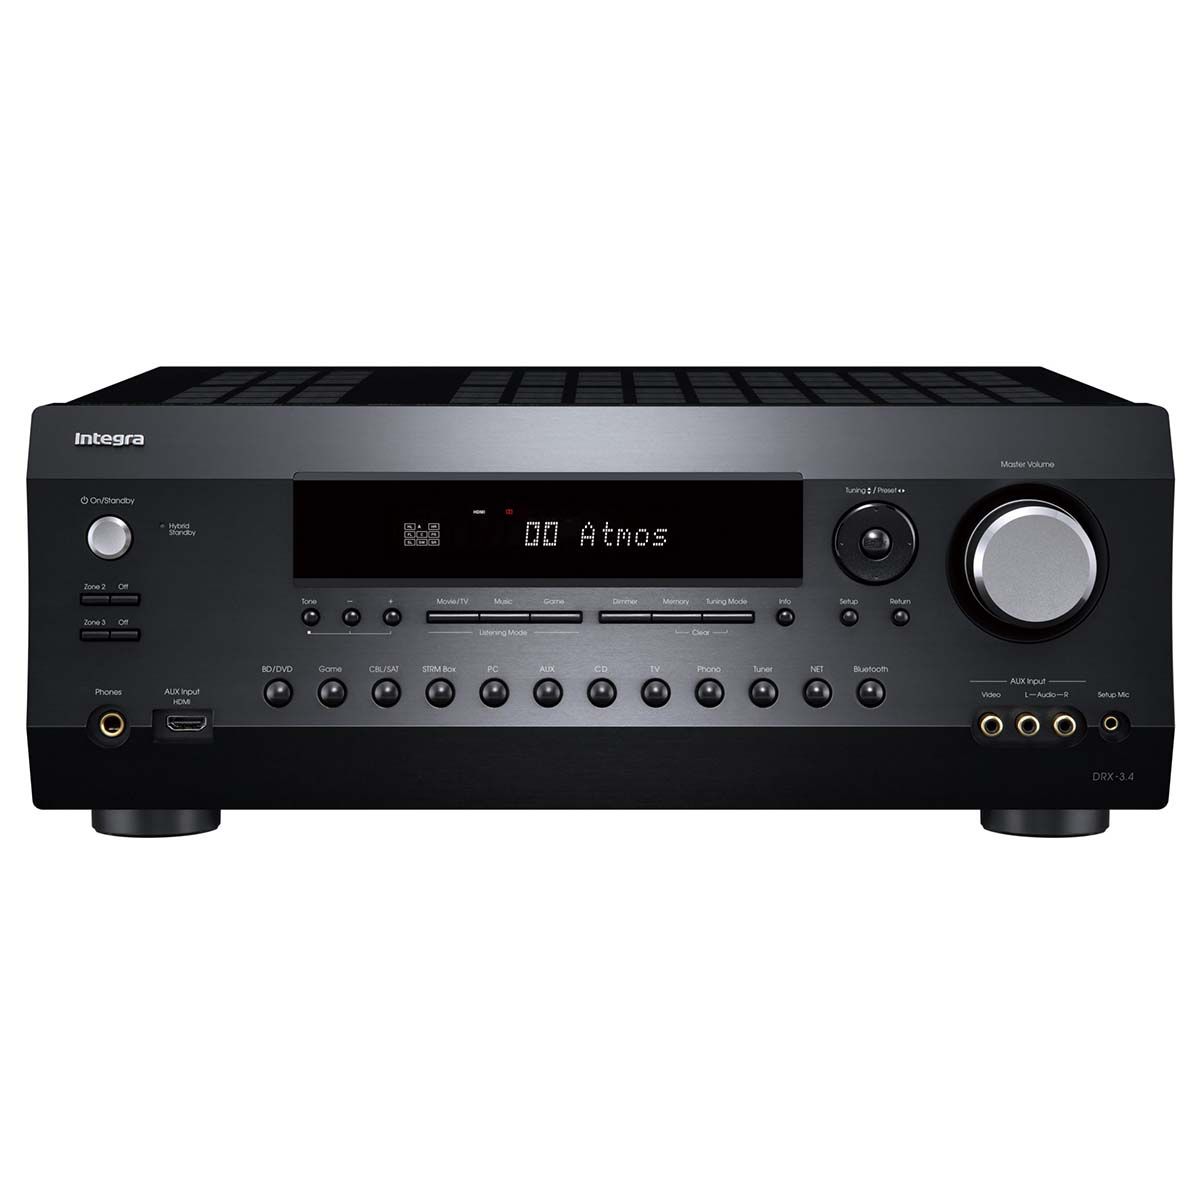 Integra DRX 3.4 Home Theater Receiver, front view